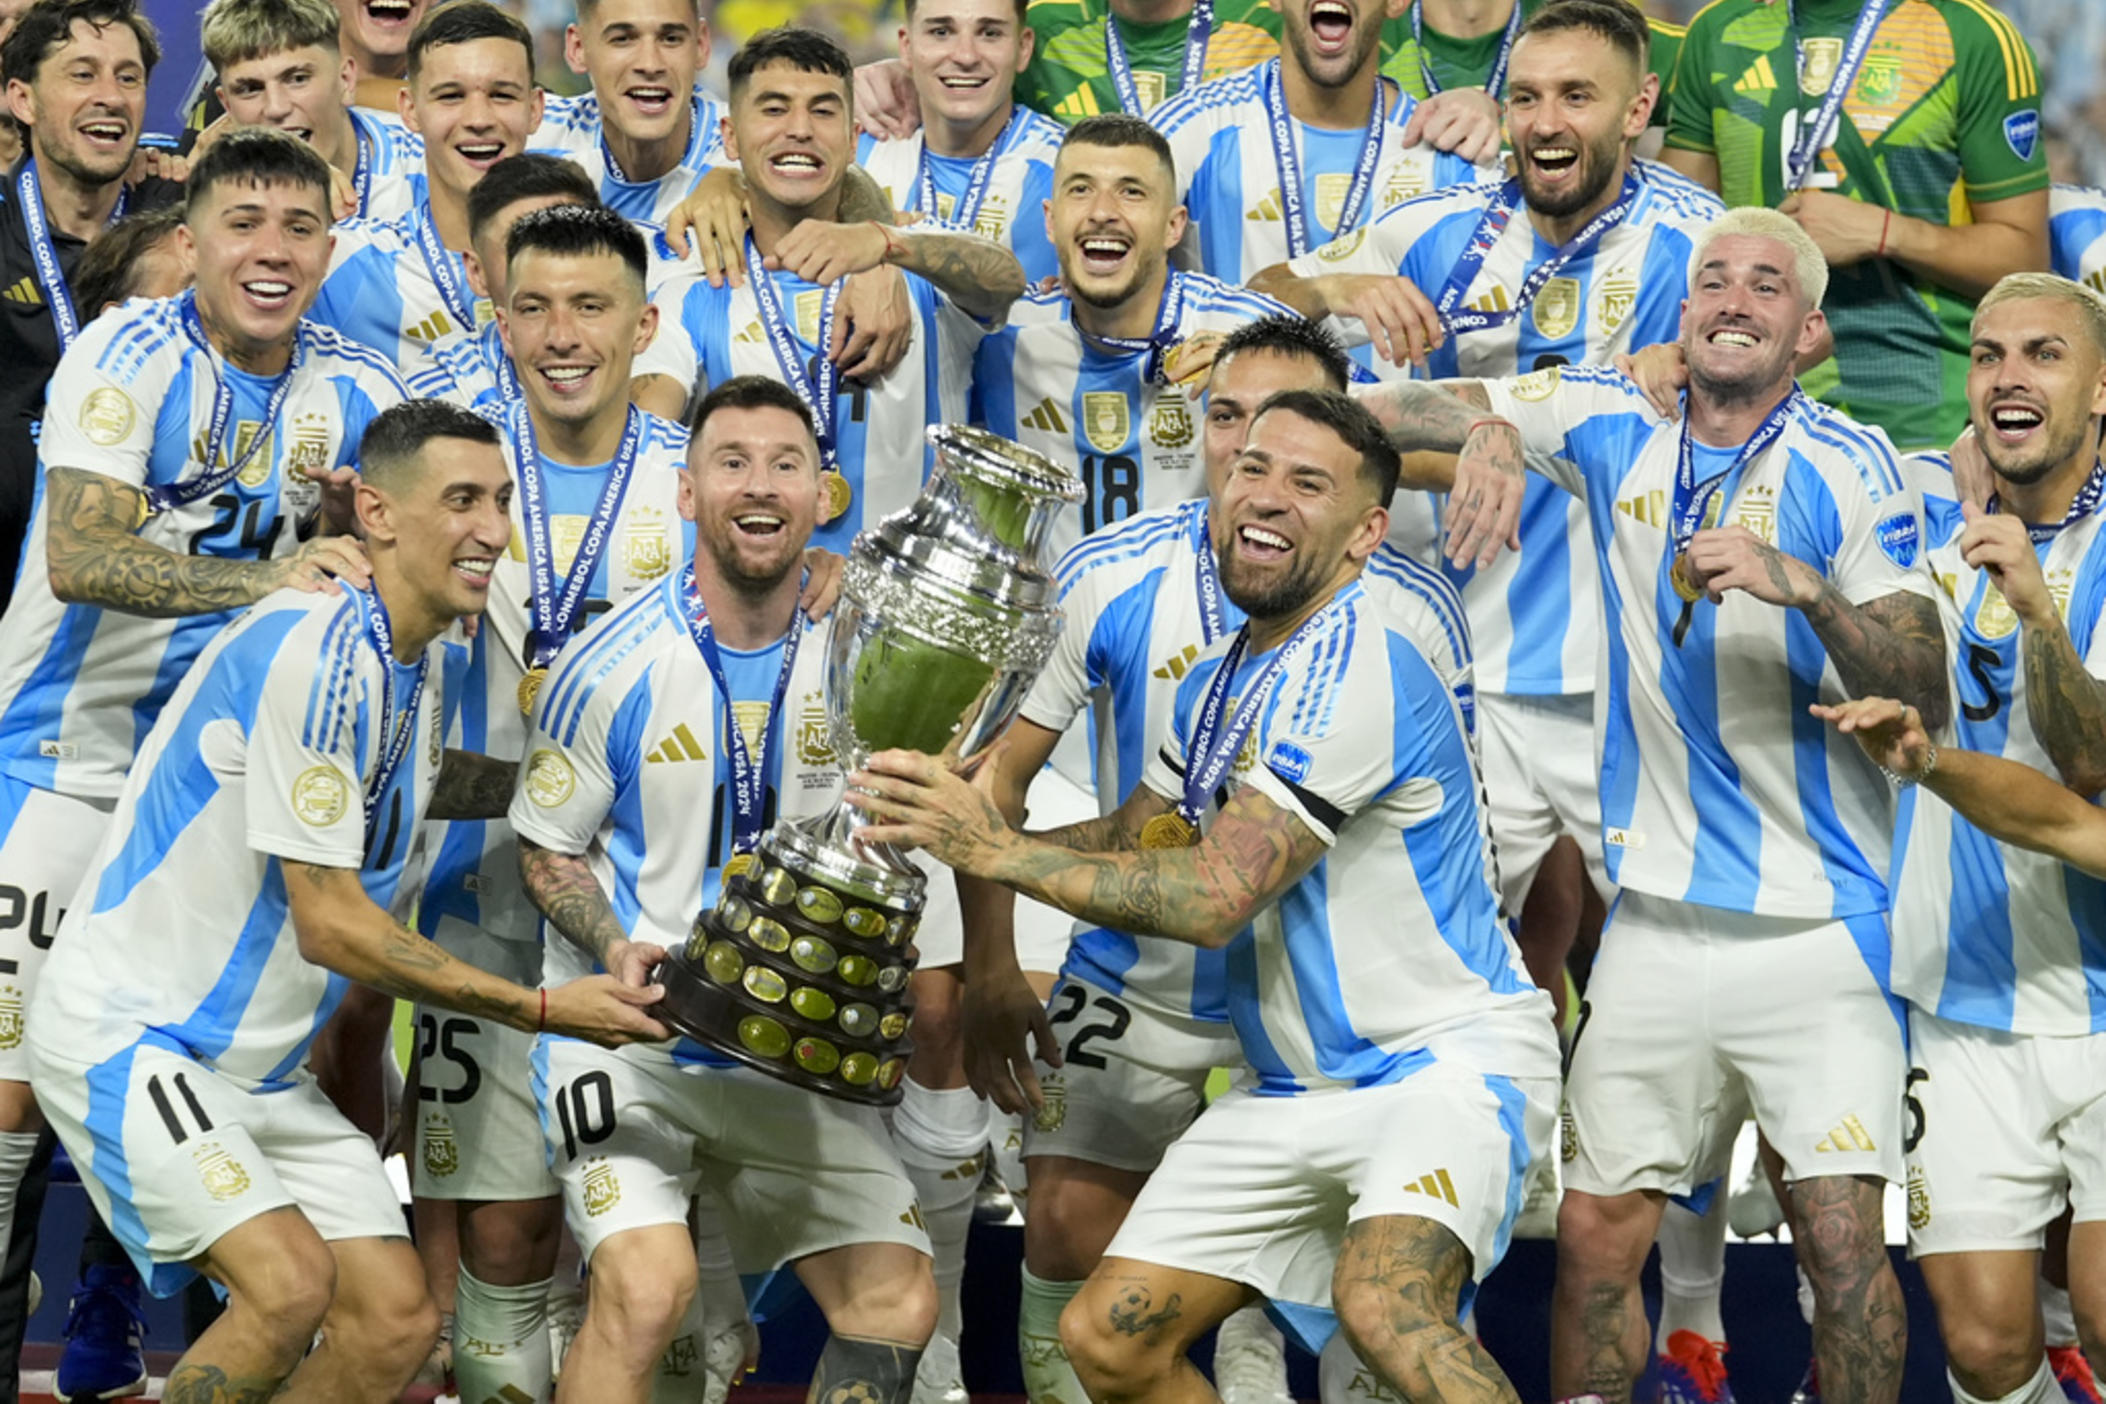 Argentina players Angel di Maria (left), Lionel Messi (second from left), and Nicolas Otamendi (third from left) celebrate with the trophy after defeating Colombia in the Copa America final soccer match in Miami Gardens, Fla., early Monday, July 15, 2024.